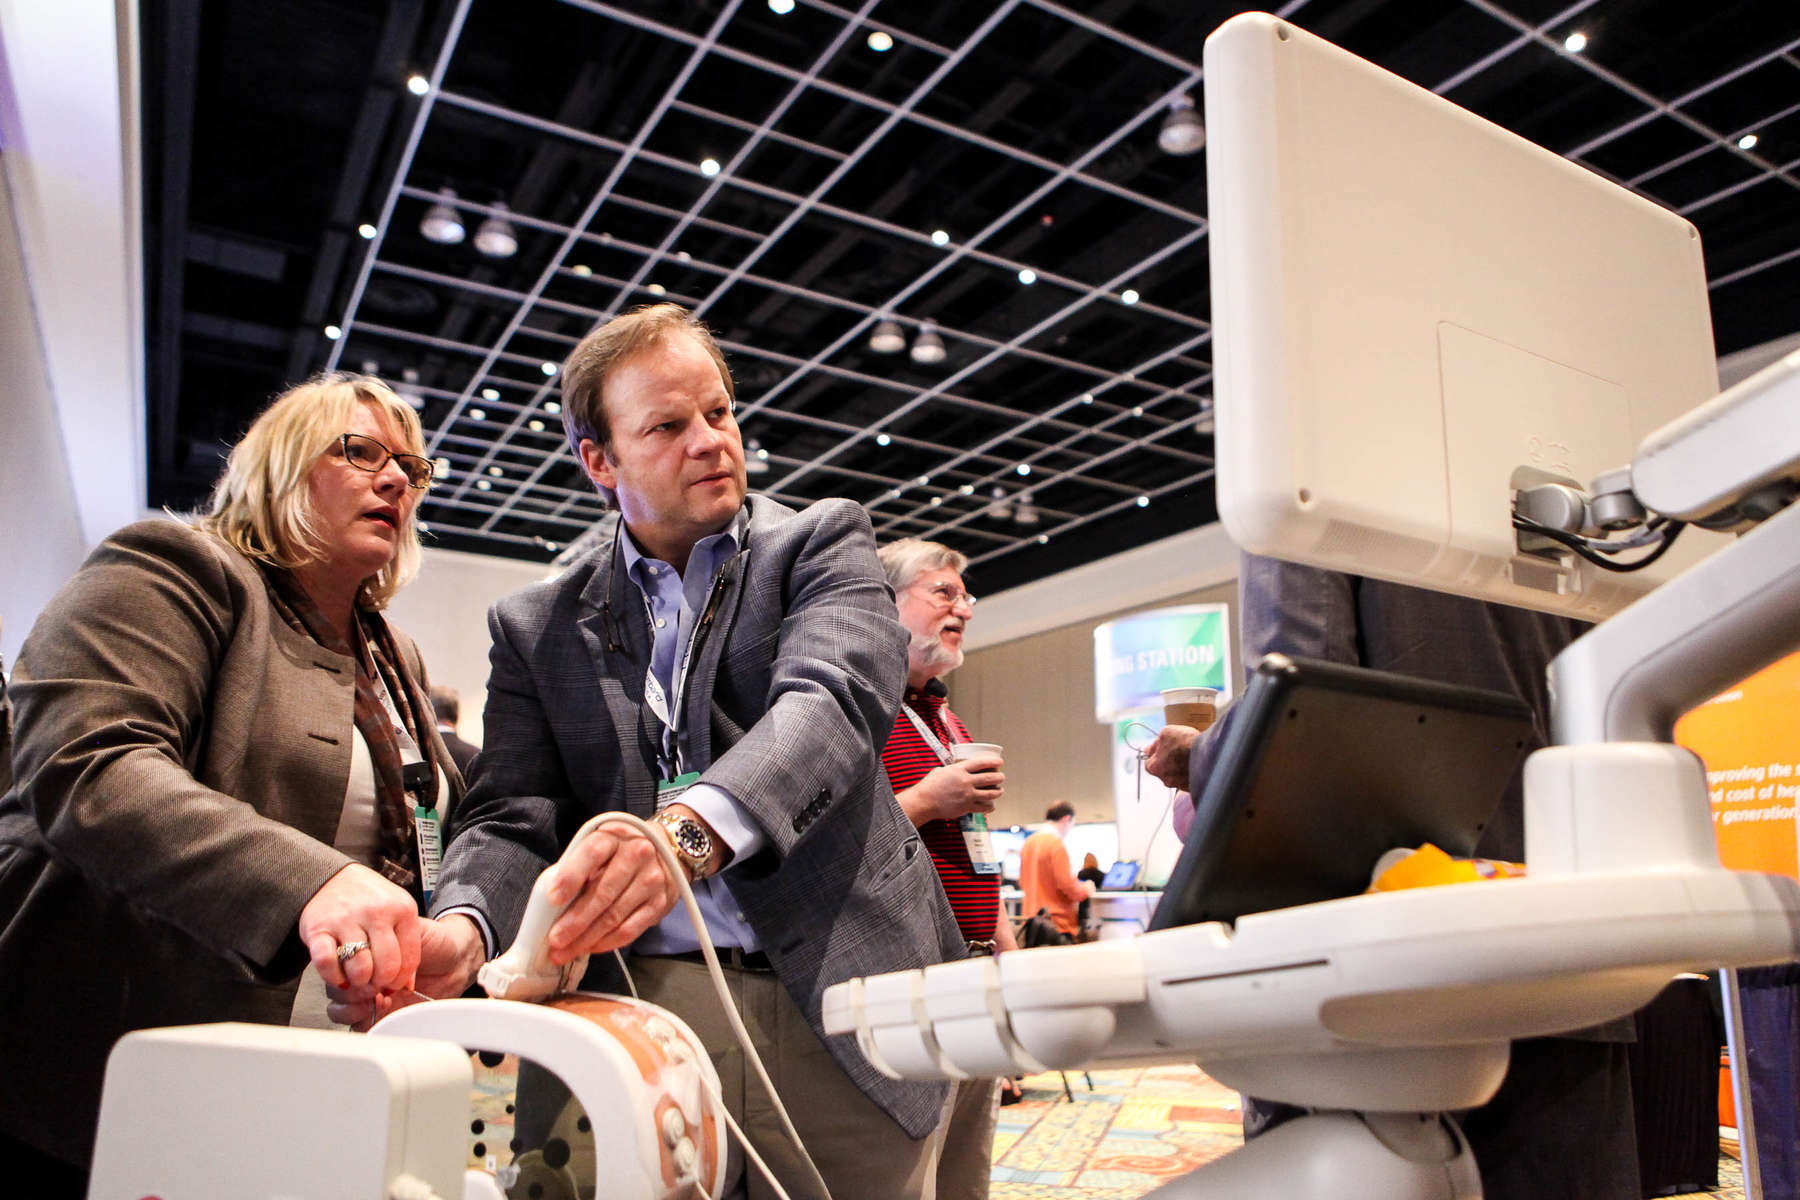 Monica Fuller shows Dr. Sven Kuestermann fusion and navigation technology with the Phillips PercuNav Epiq 7 Ultrasound system in the exhibit hall.